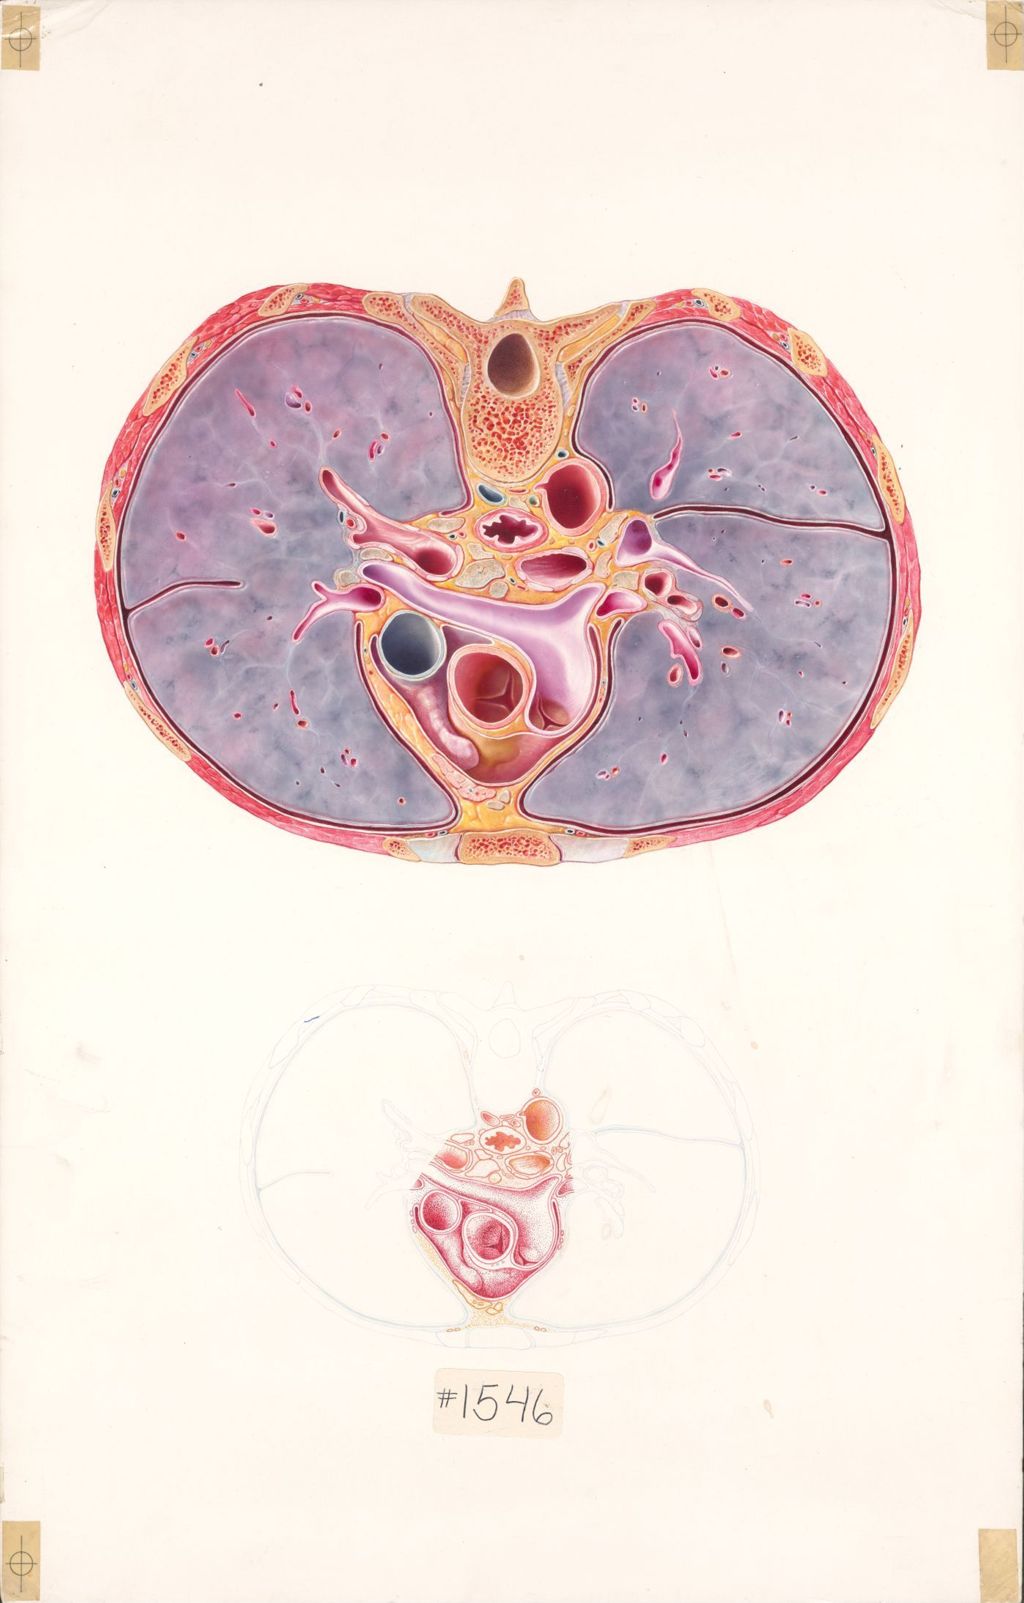 Miniature of The Anatomical Disposition of the Thorax, The Mediastinum, Plate II, Horizontal Section Through the Mediastinum